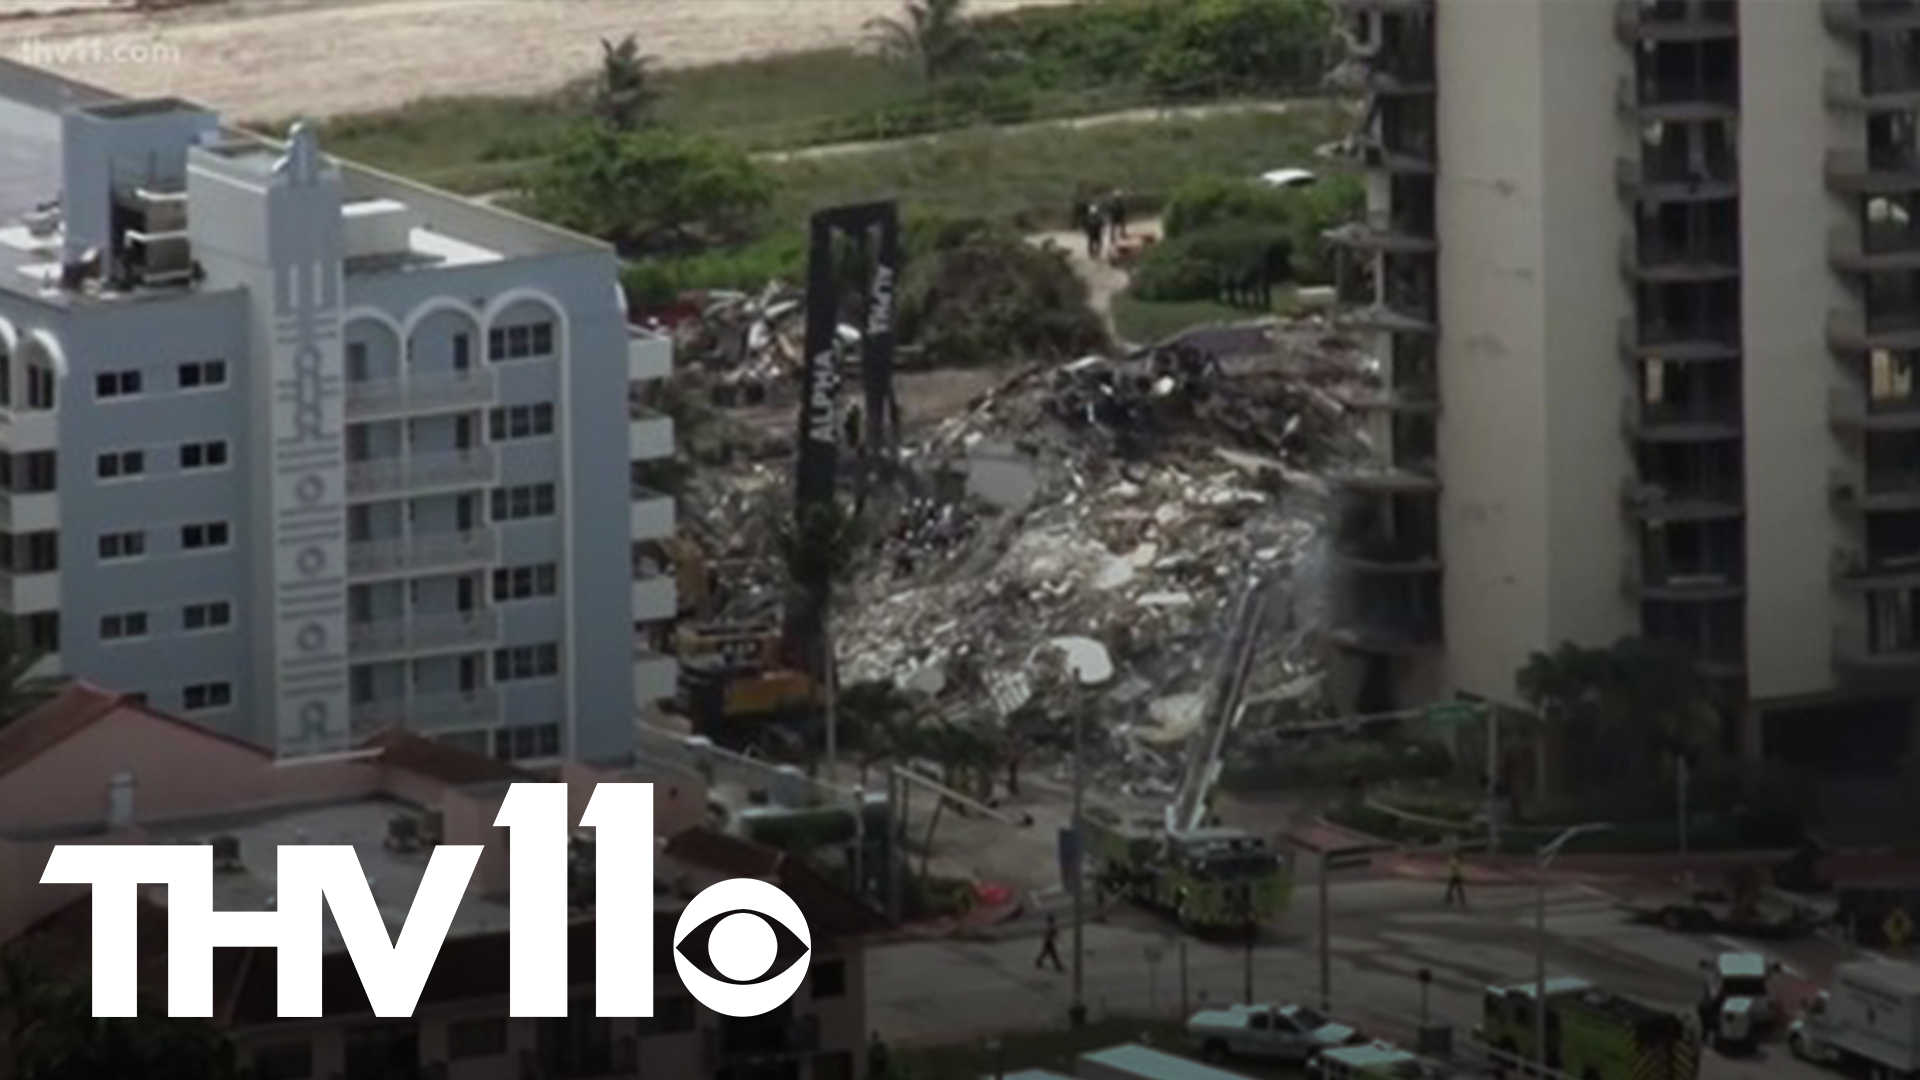 First responders from across Florida, Mexico and Israel have joined the effort to search for survivors of the partial building collapse in Surfside.